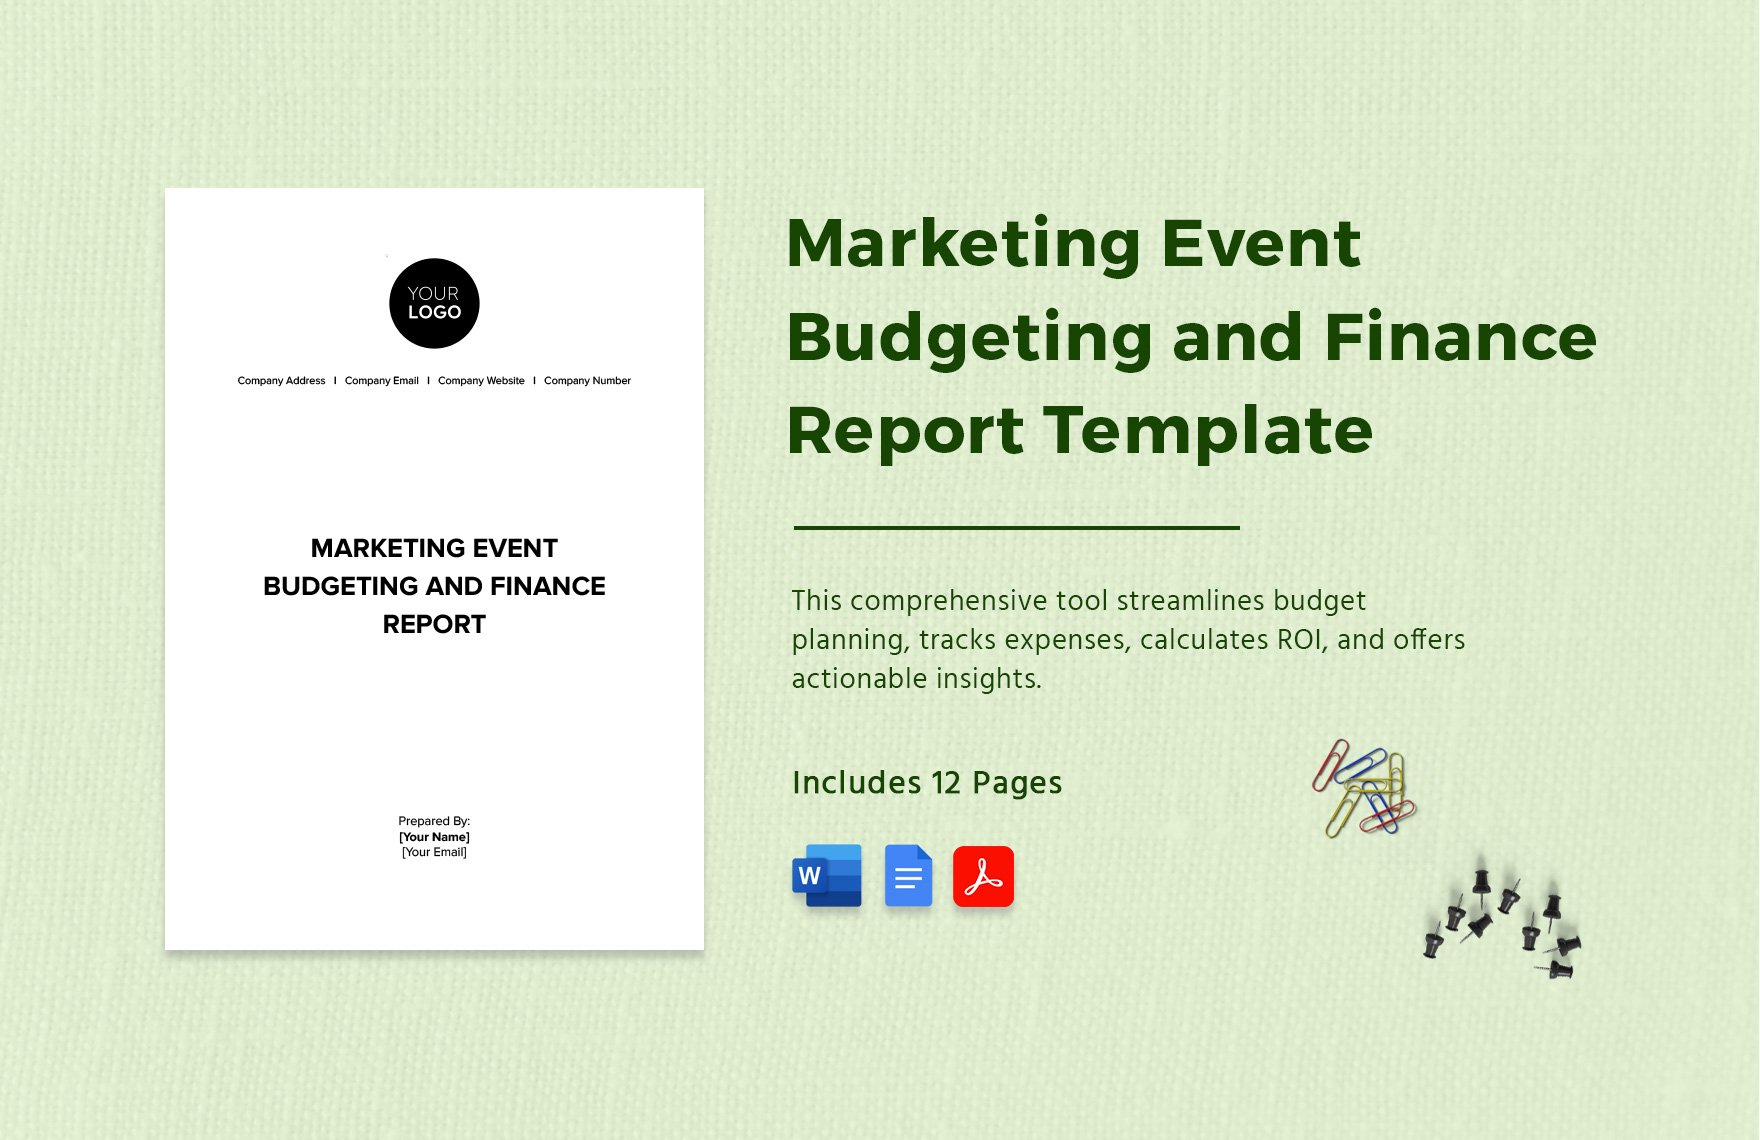 Marketing Event Budgeting and Finance Report Template in Word, Google Docs, PDF